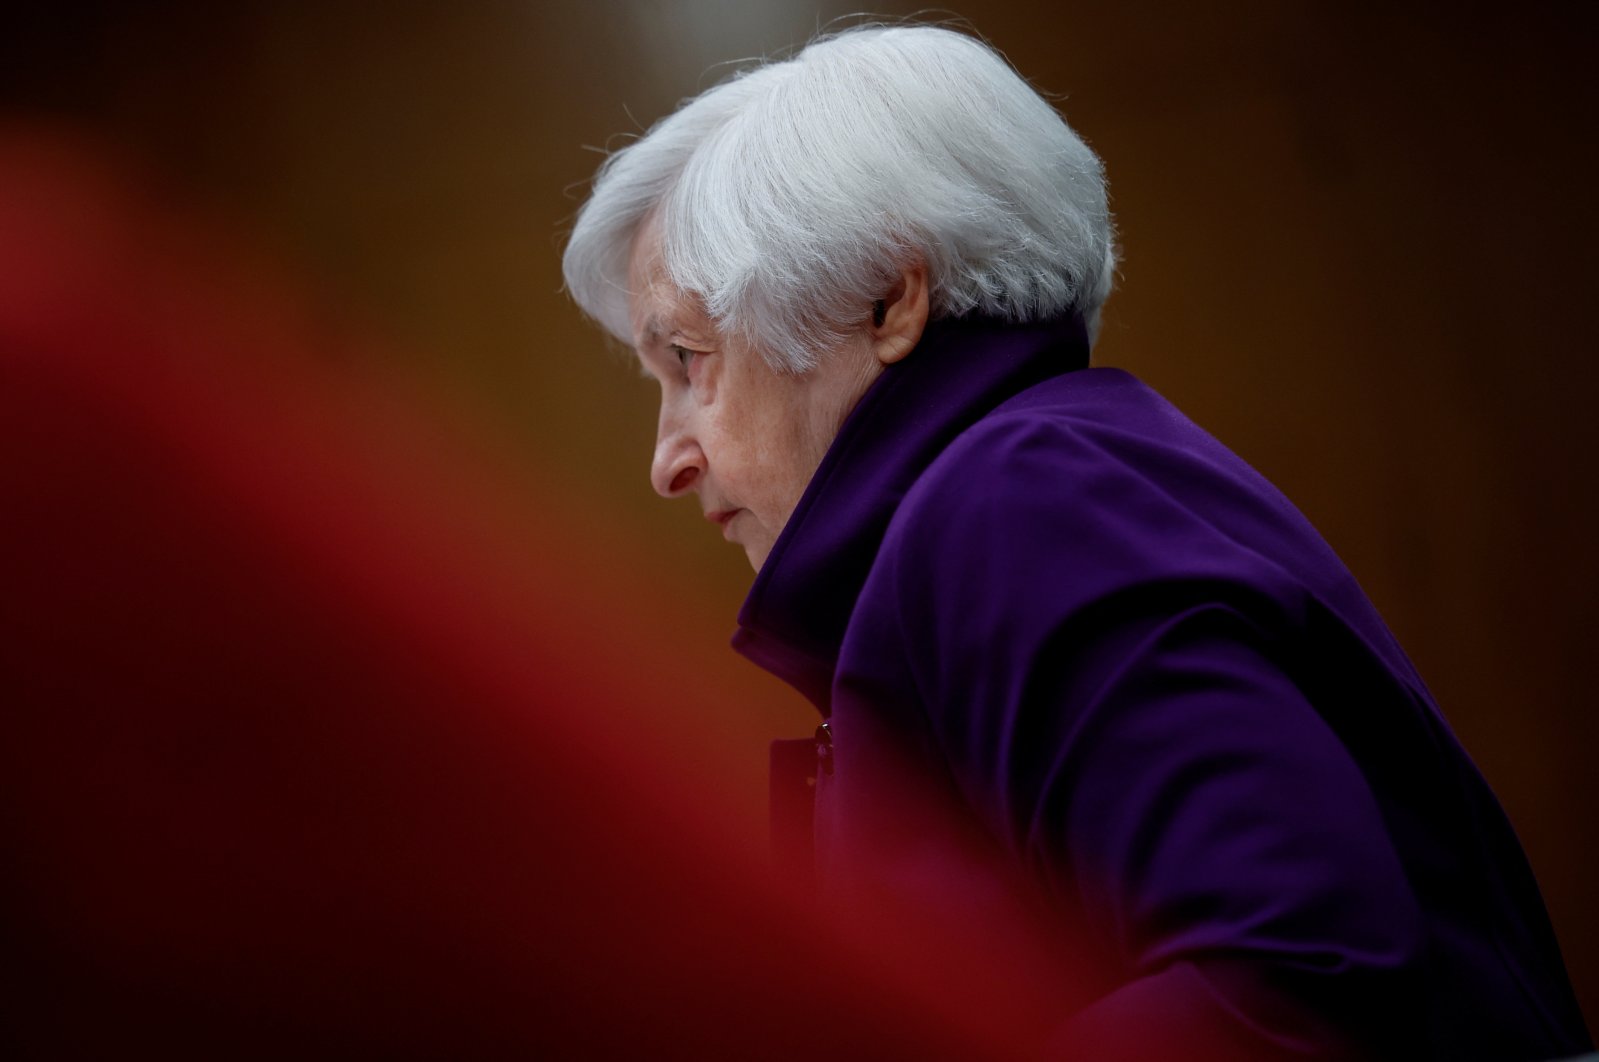 Yellen’s decades of experience tested by bank failures, rescue